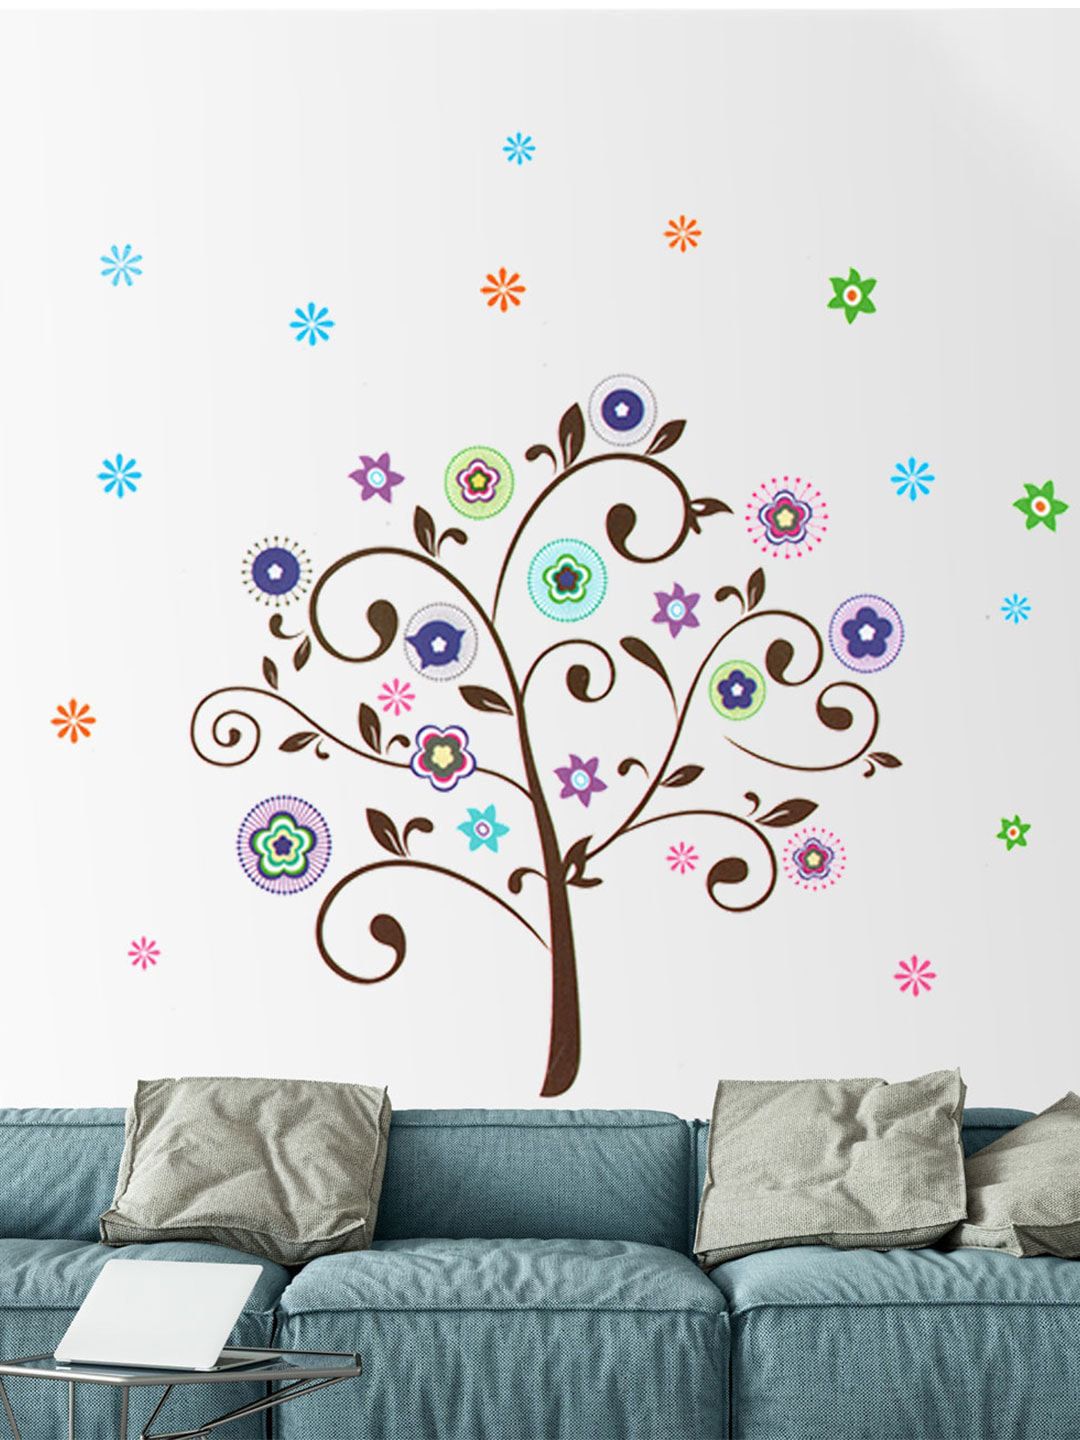 Art Street Multi Decals and Stickers For Decor Price in India